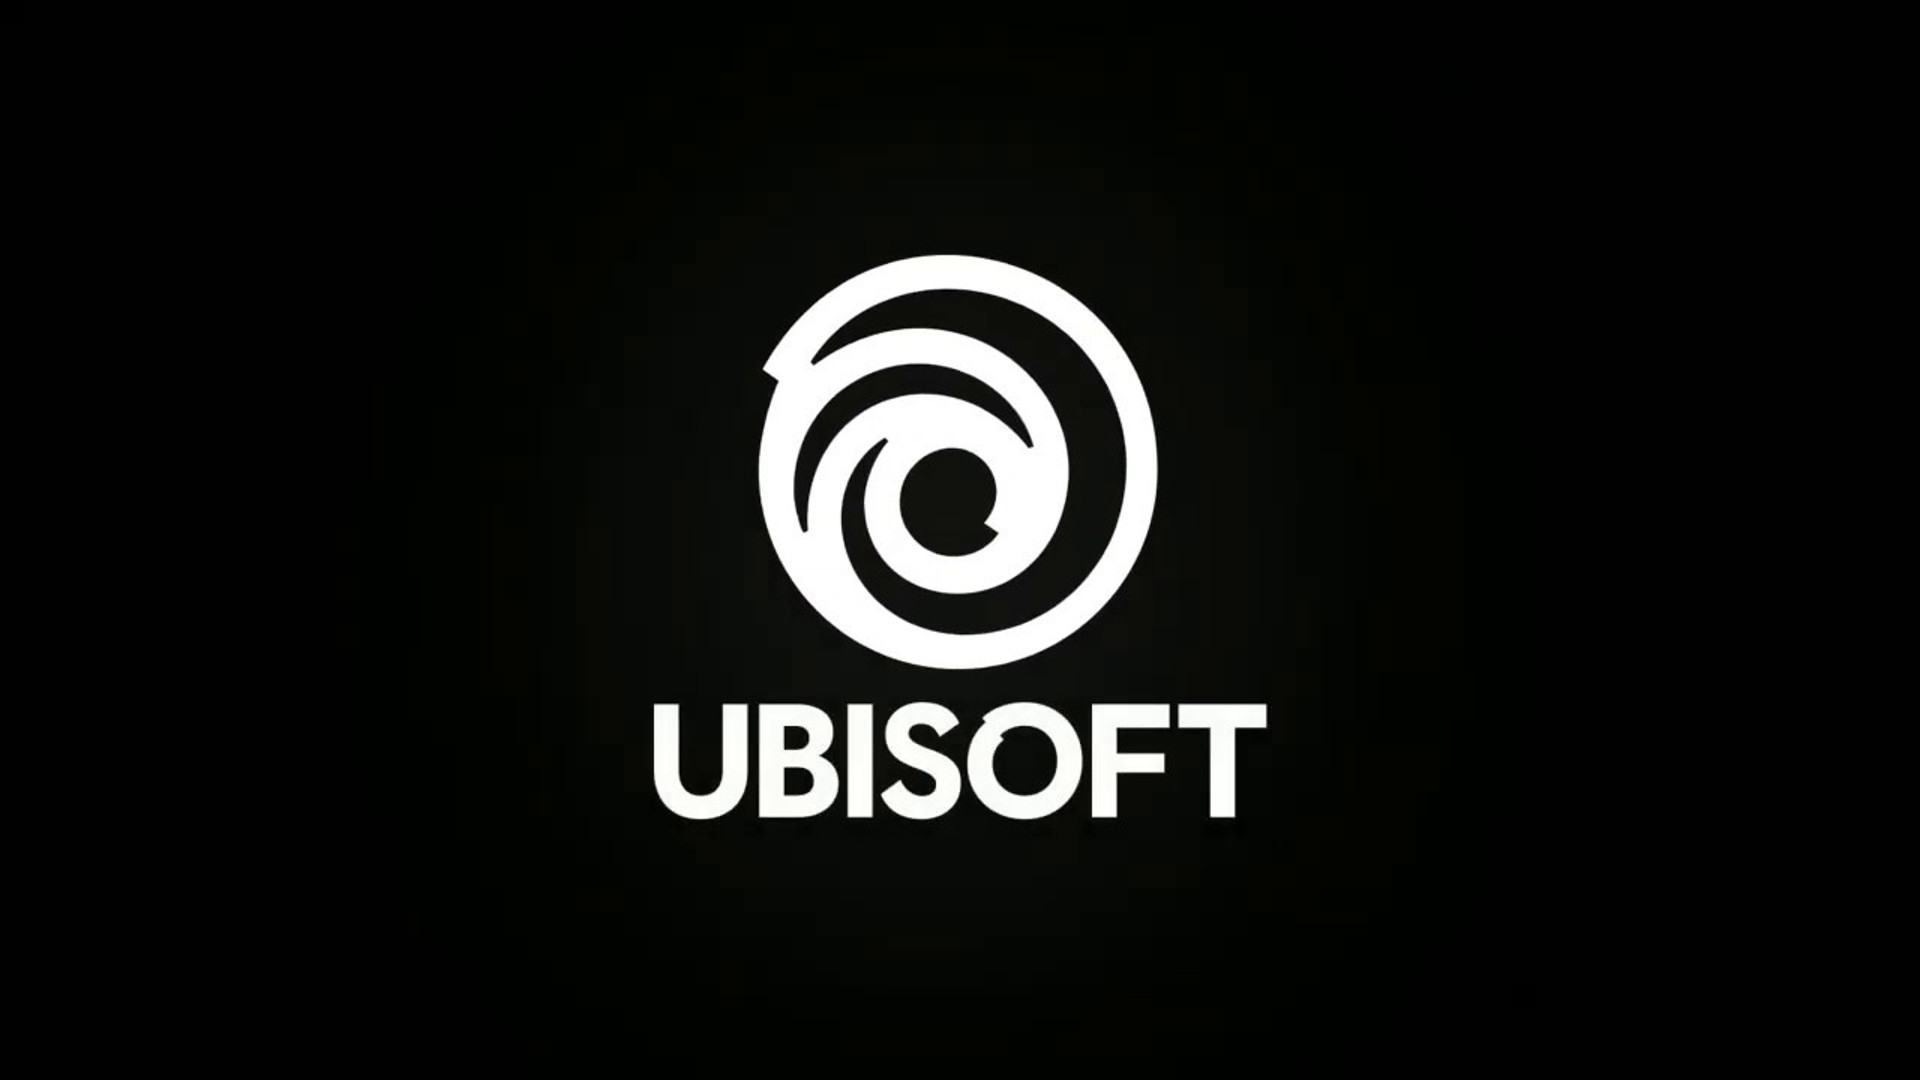 Ubisoft head responds to employees’ open letter, says studio has “made important progress over the past year”